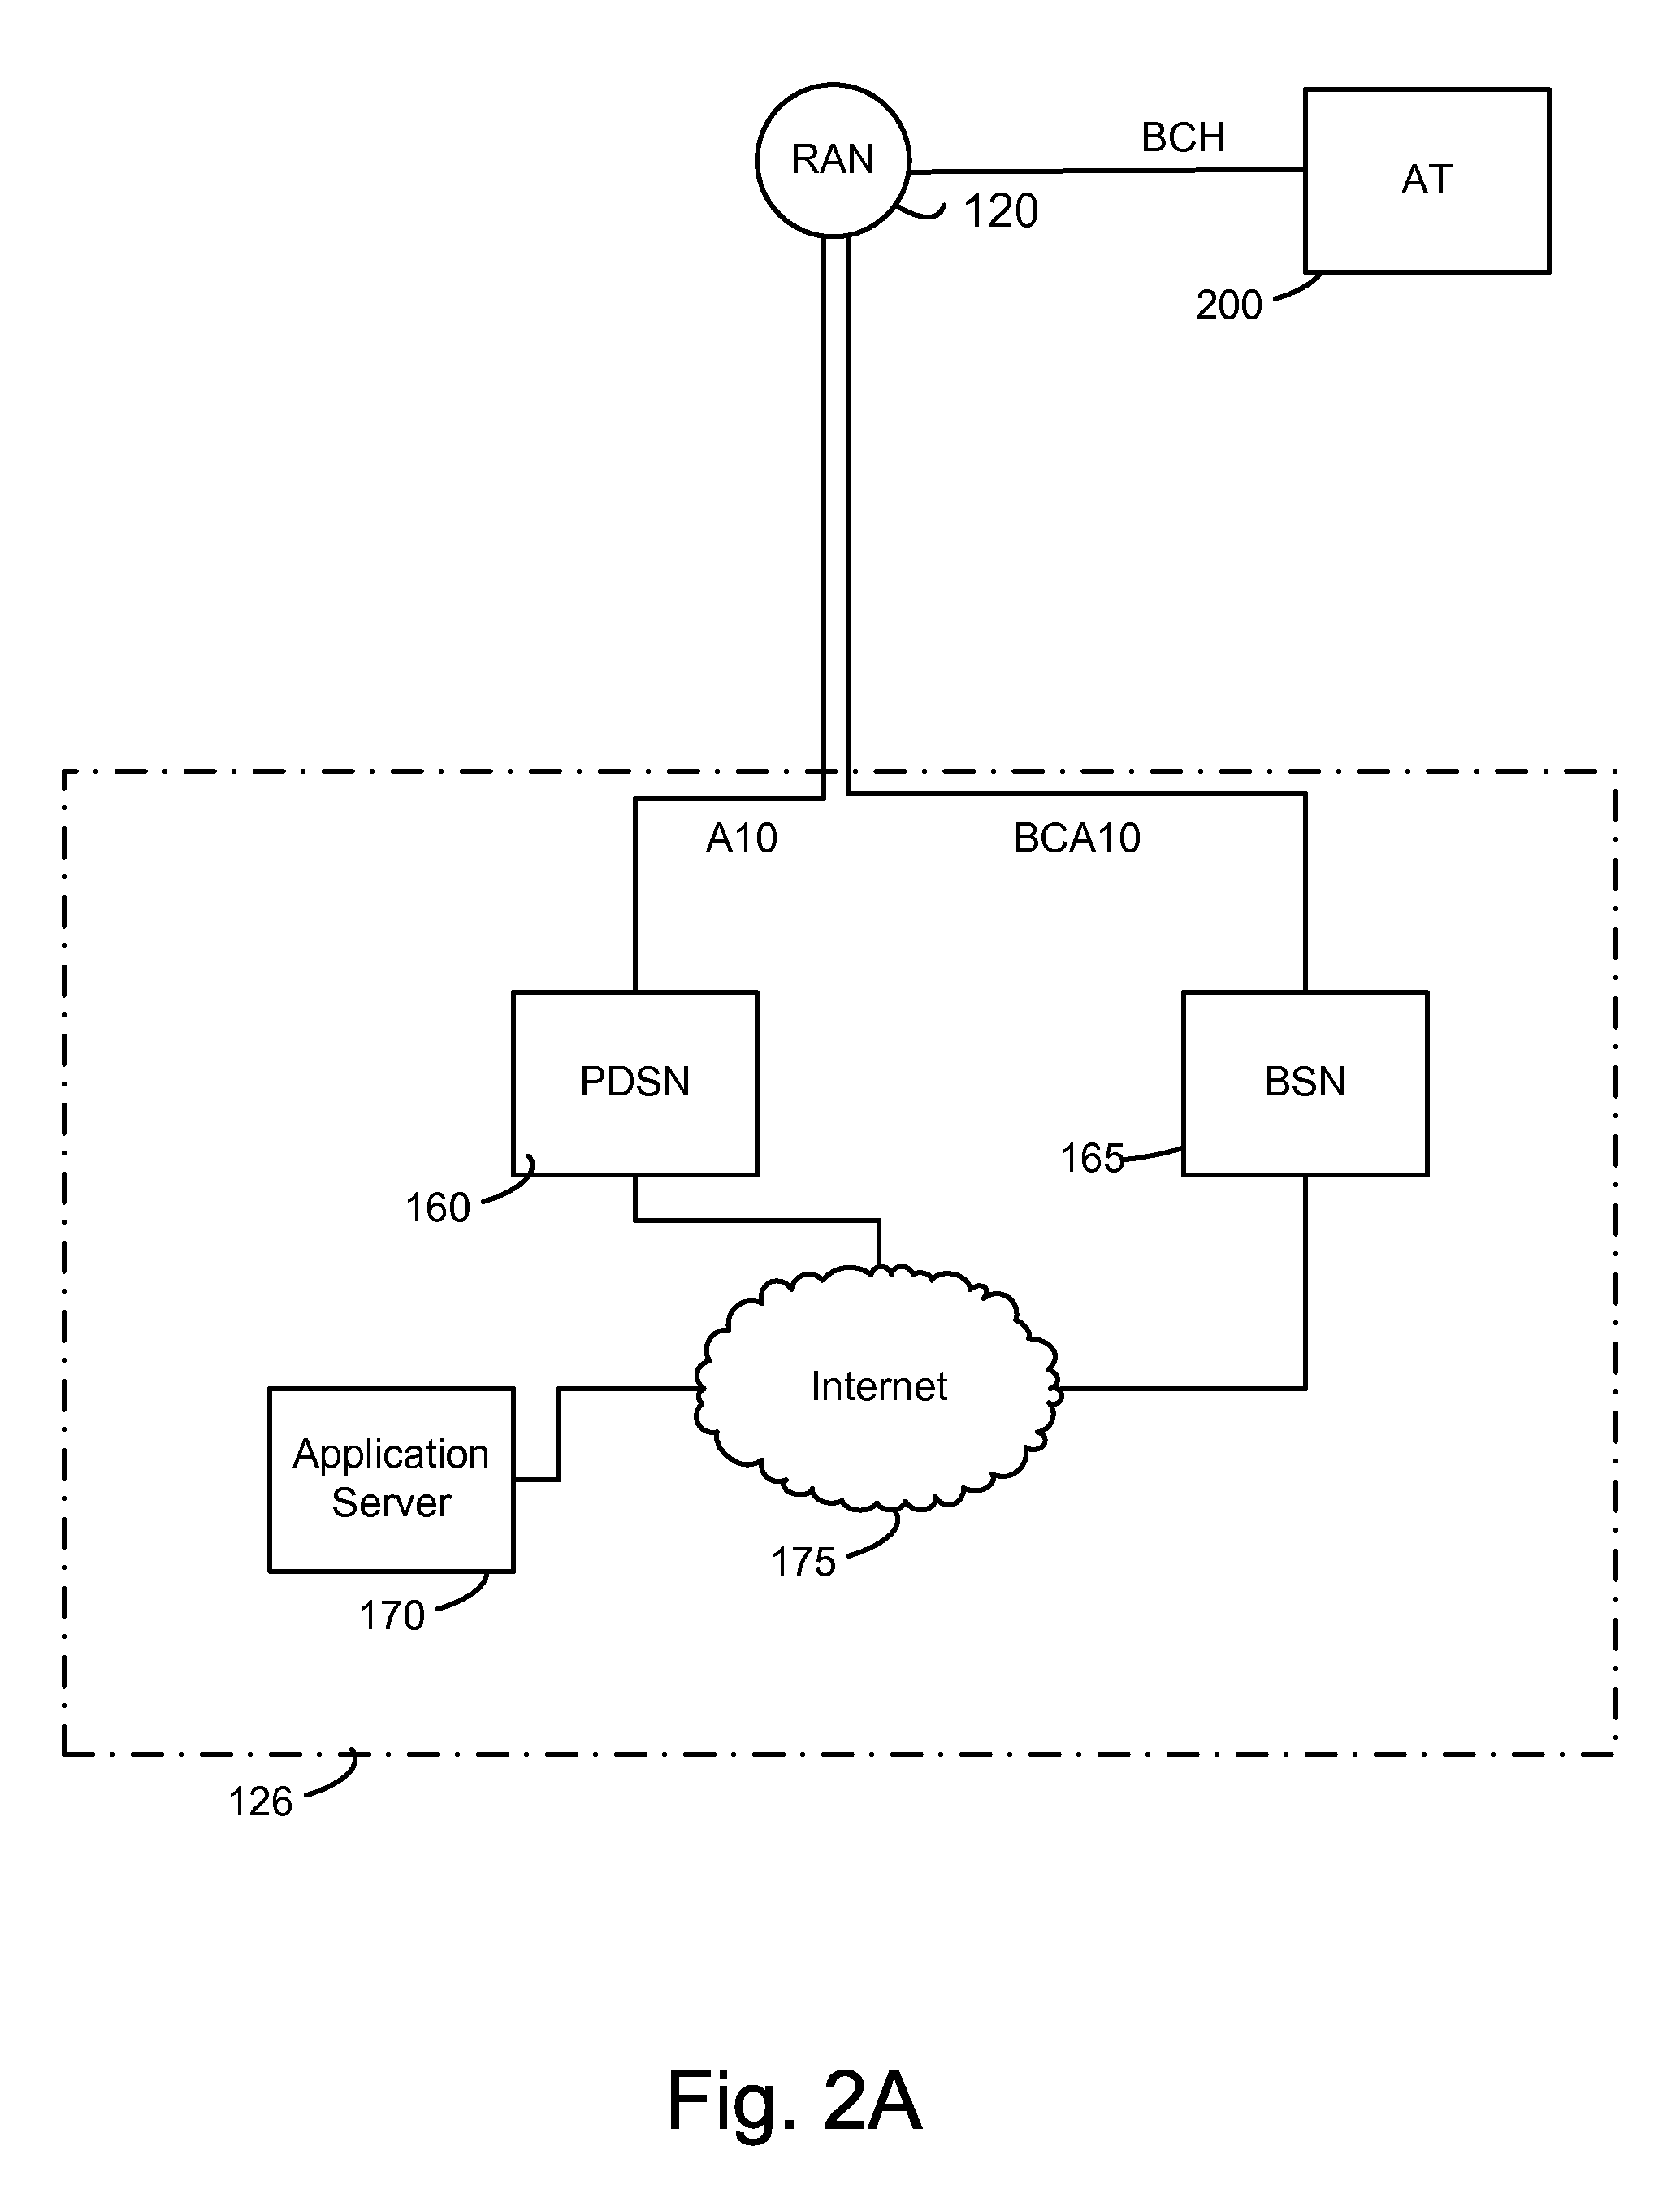 Dynamically adjusting paging cycles of a network at an access terminal based on service availability of another network within a wireless communication system